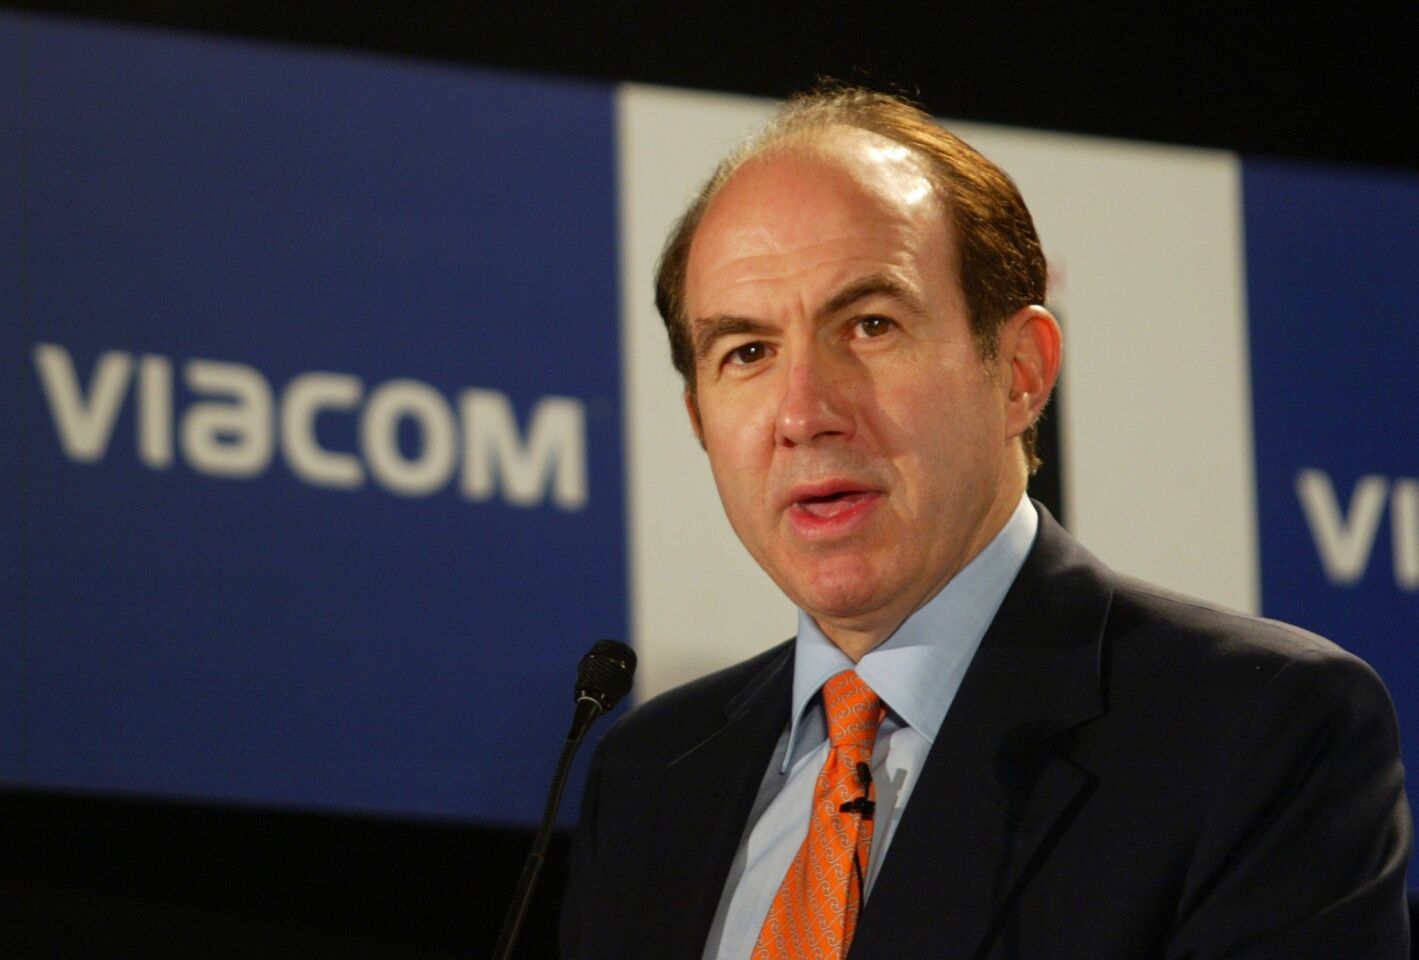 Philippe Dauman, CEO of Viacom Inc., received a compensation package of $33.4 million in 2012. Prior to this position, Dauman ran his private equity firm, DND Capital Partners.